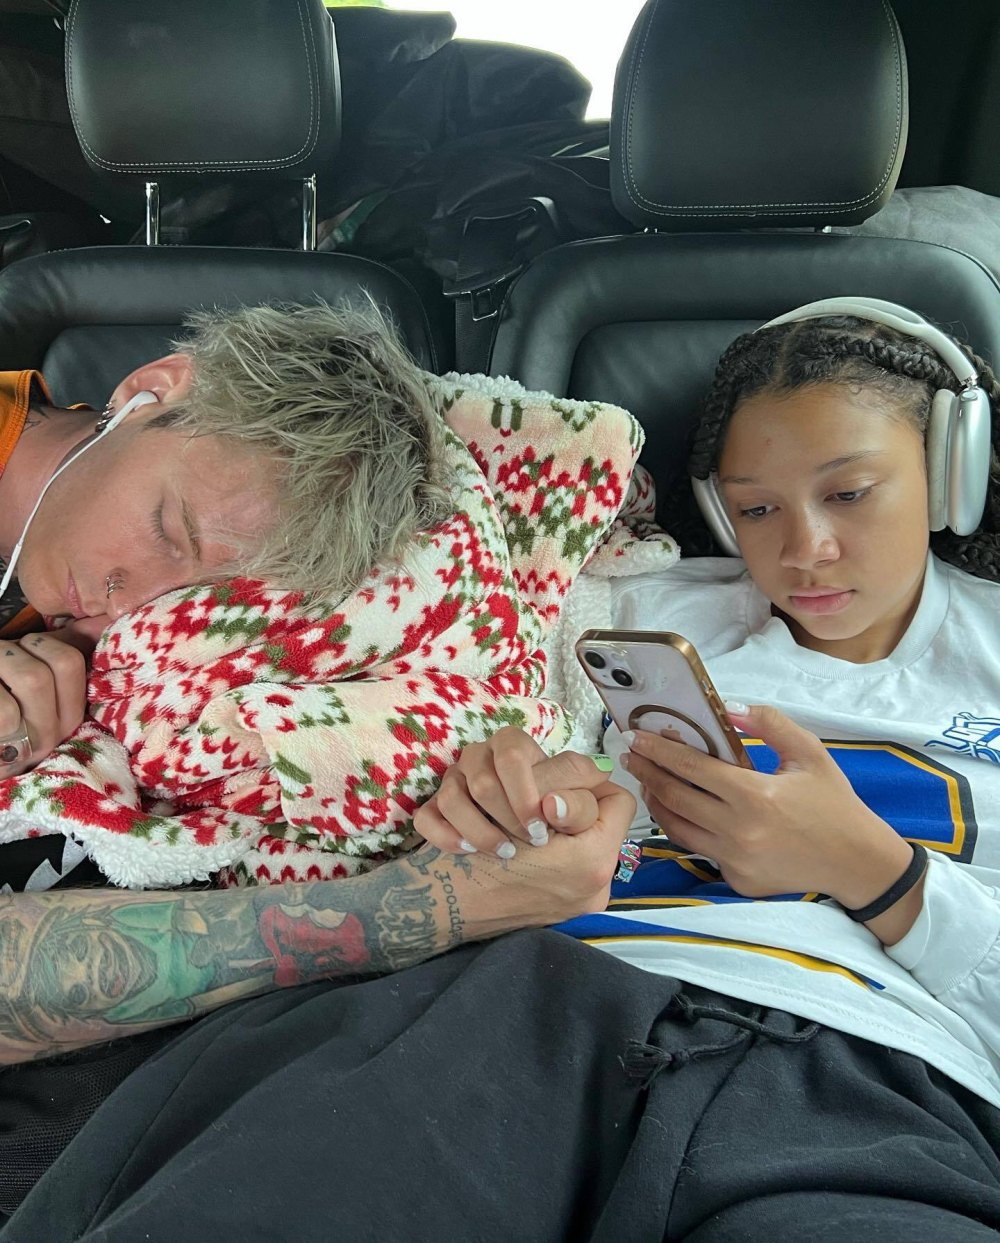 MGK's Daughter Gives Him a Tattoo